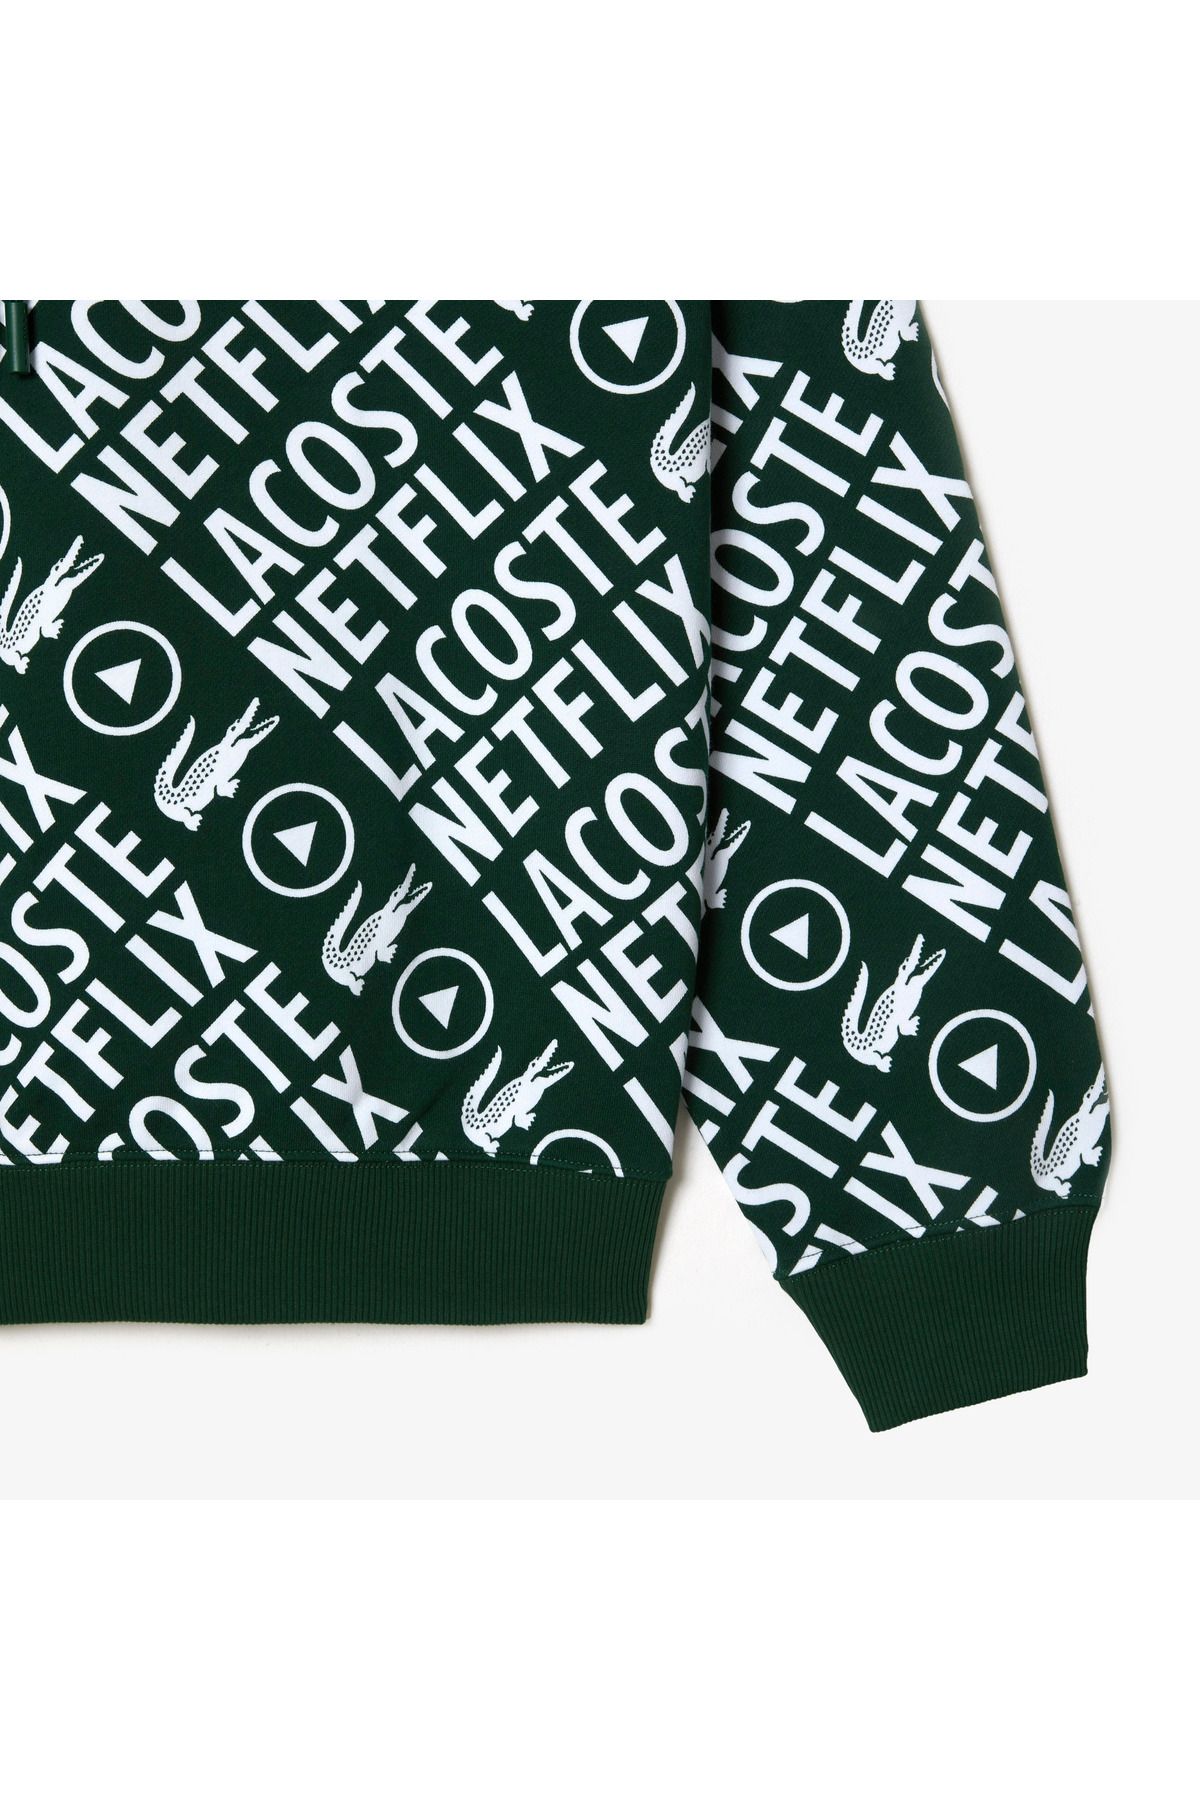 Lacoste X Netflix Men's Loose Fit Hasted Sweatryrt